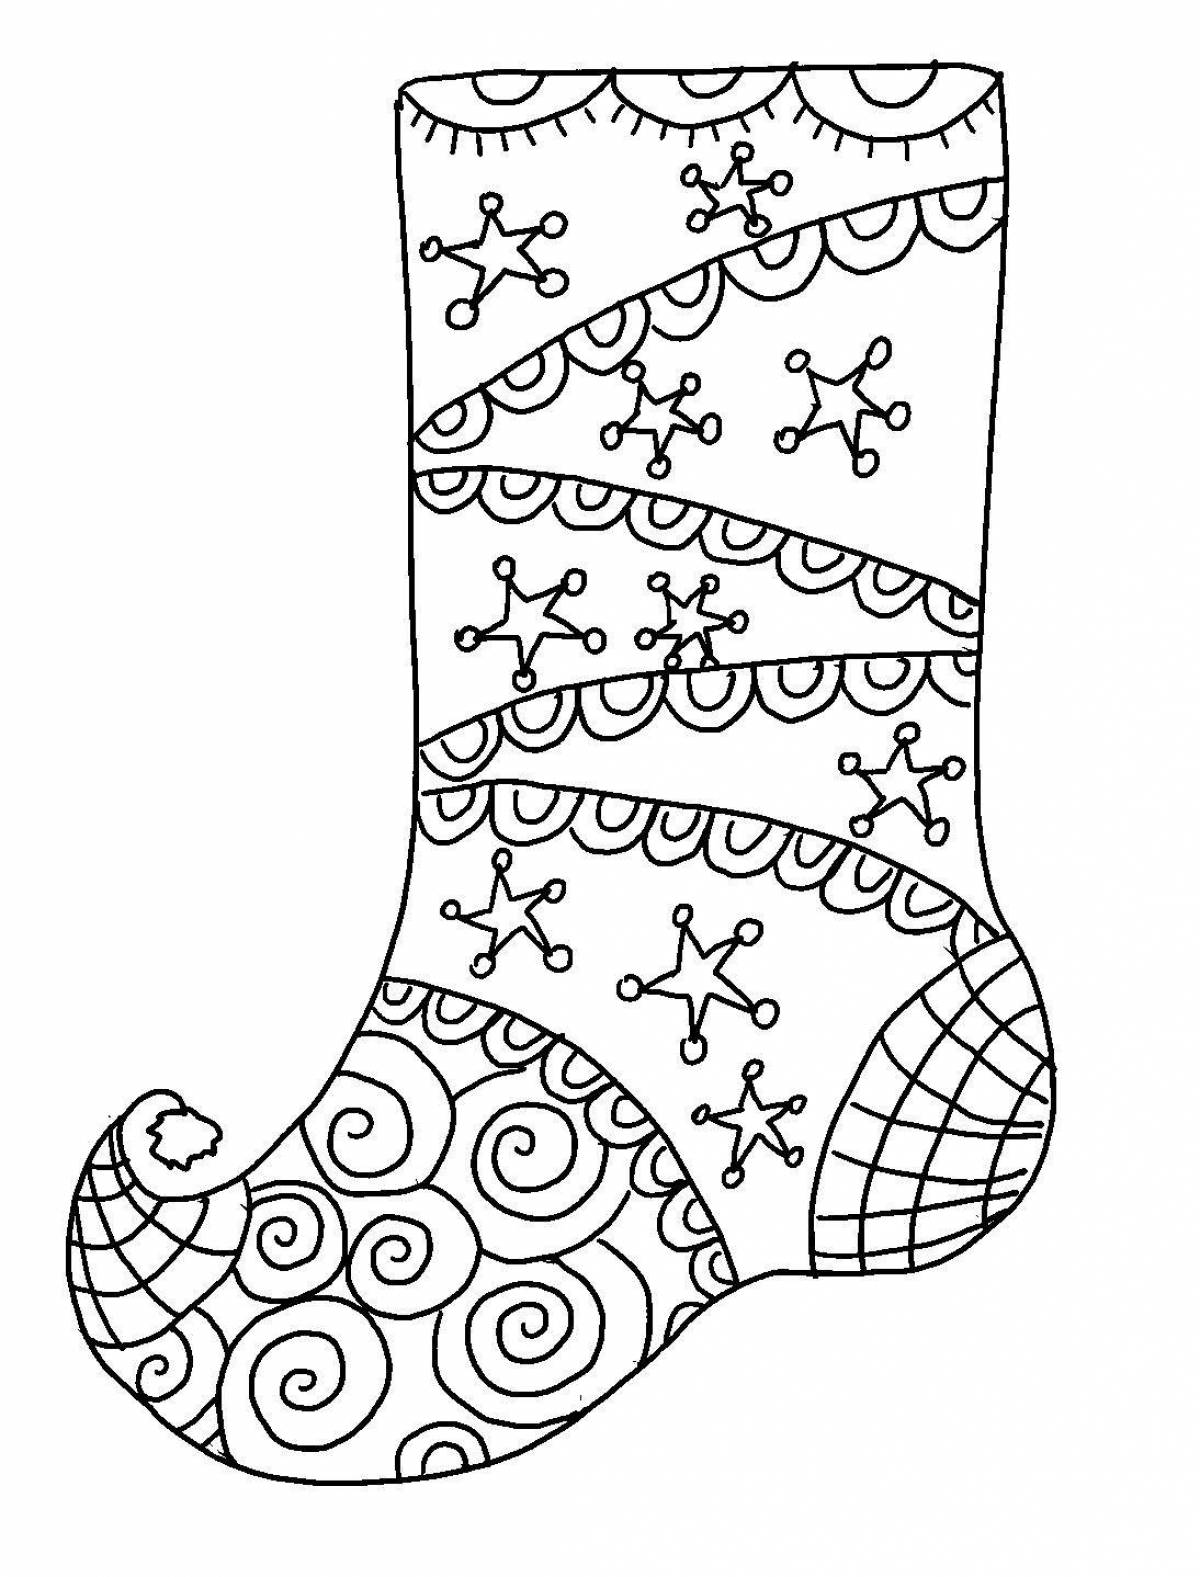 Coloring for bright boots for children